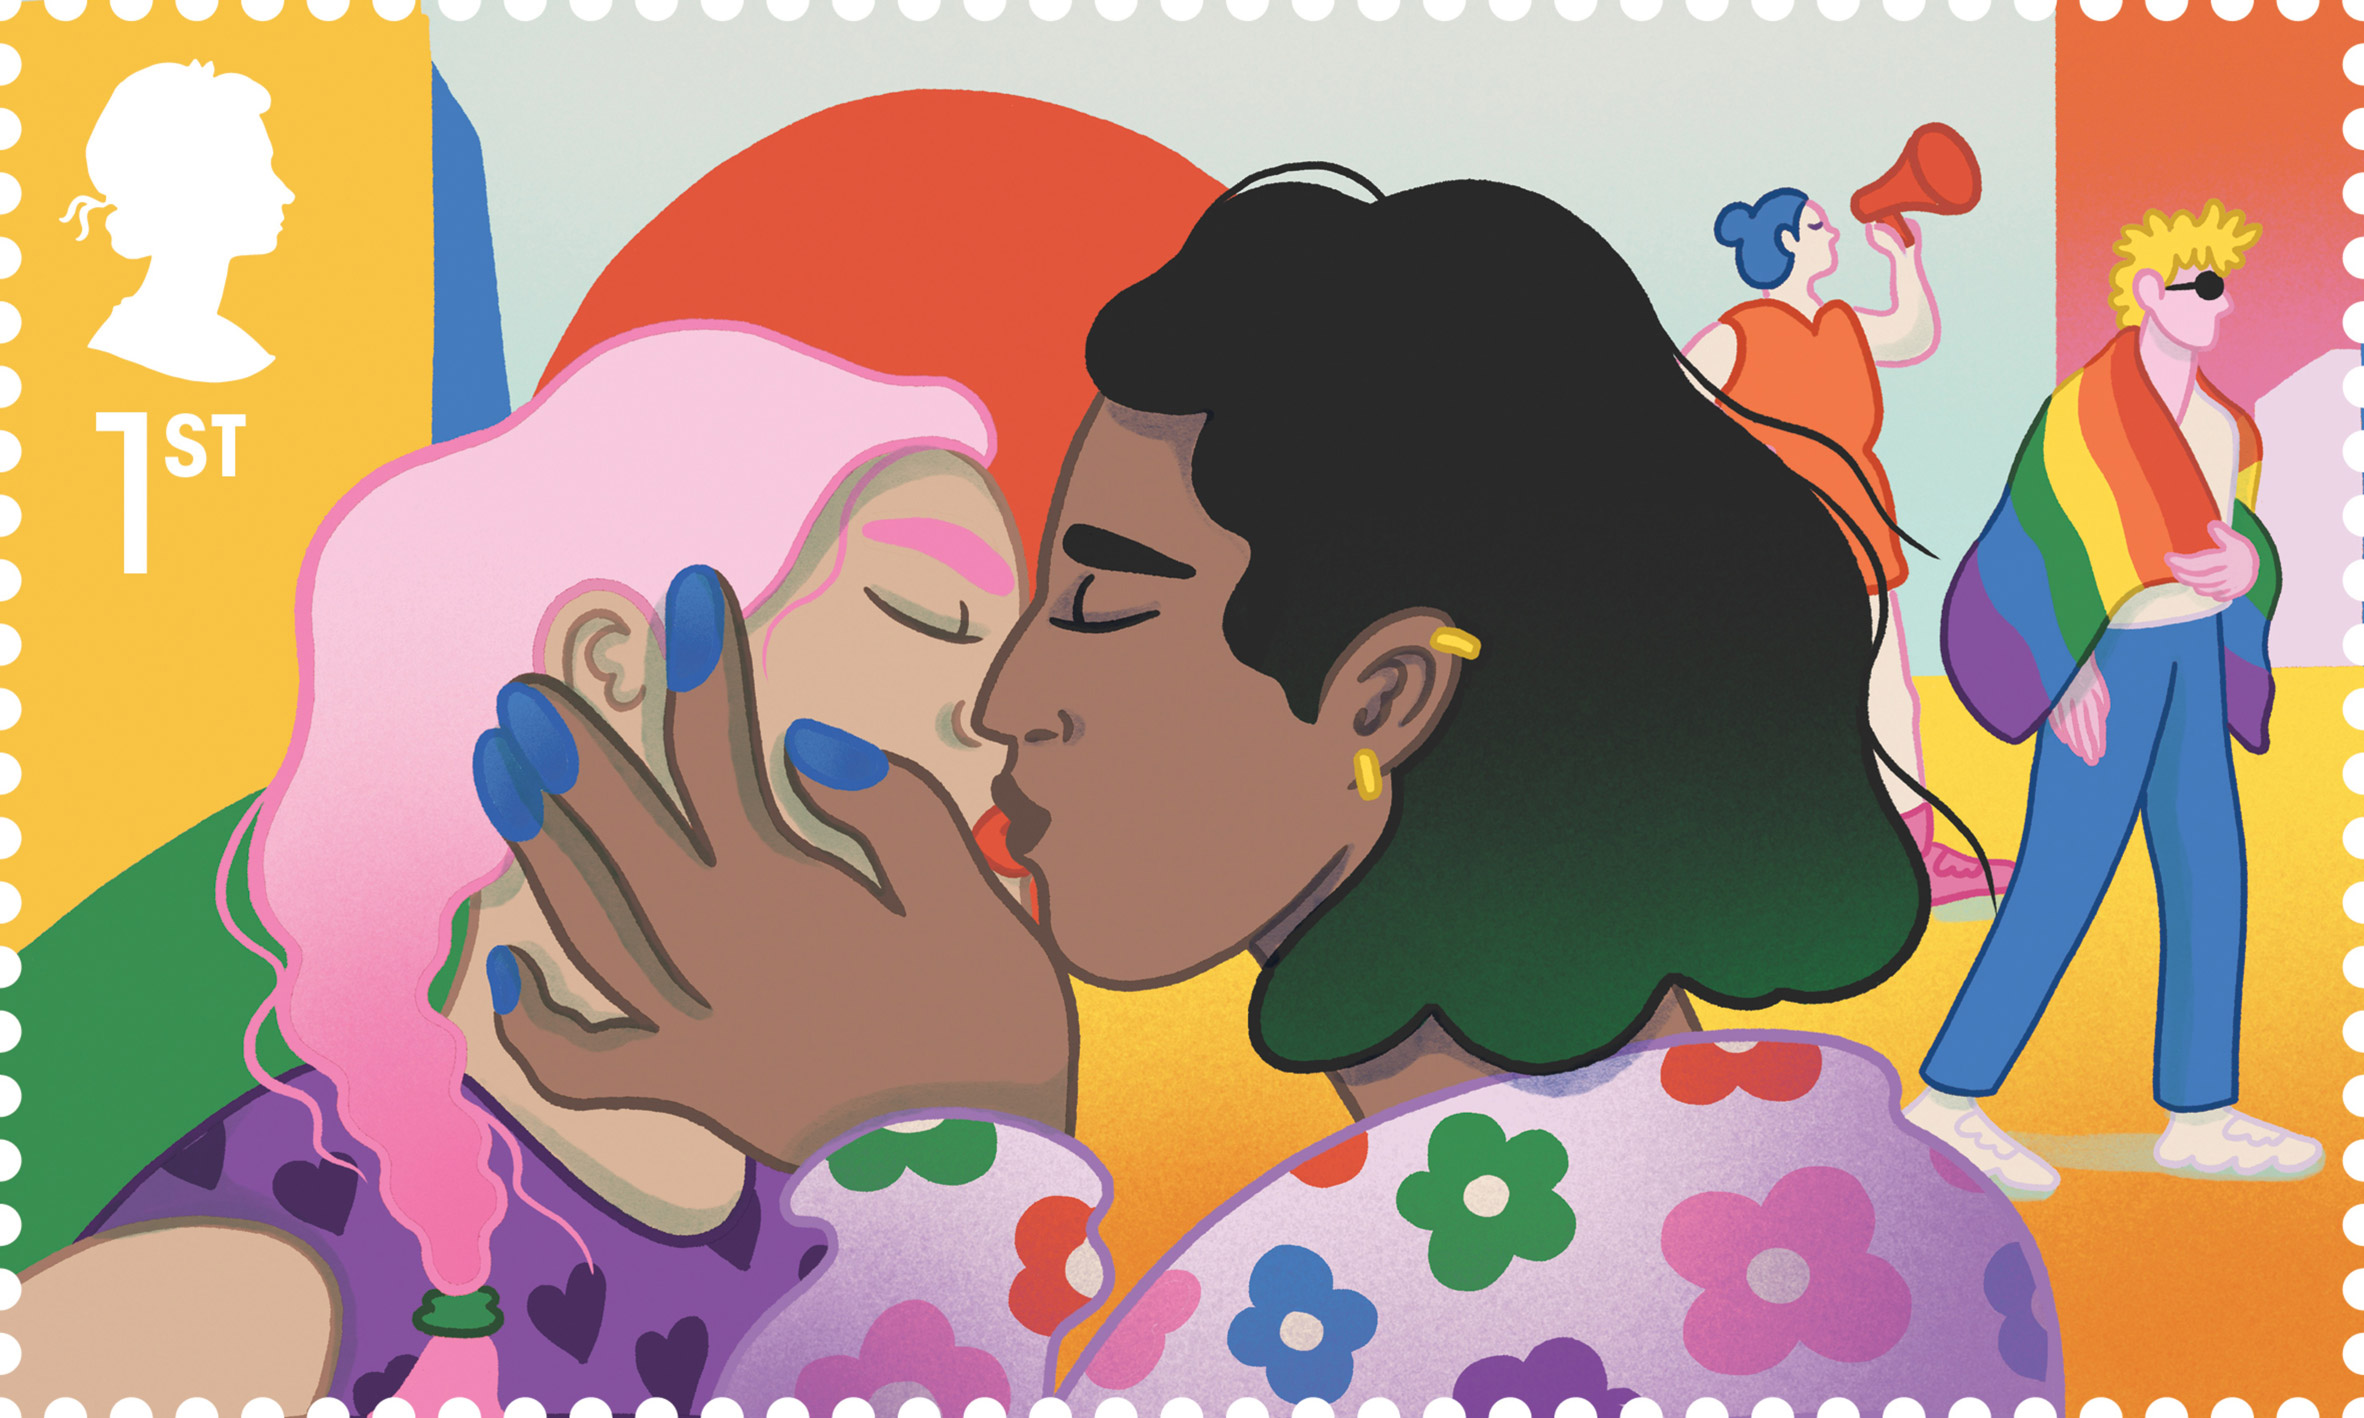 An illustration of a lesbian couple kissing